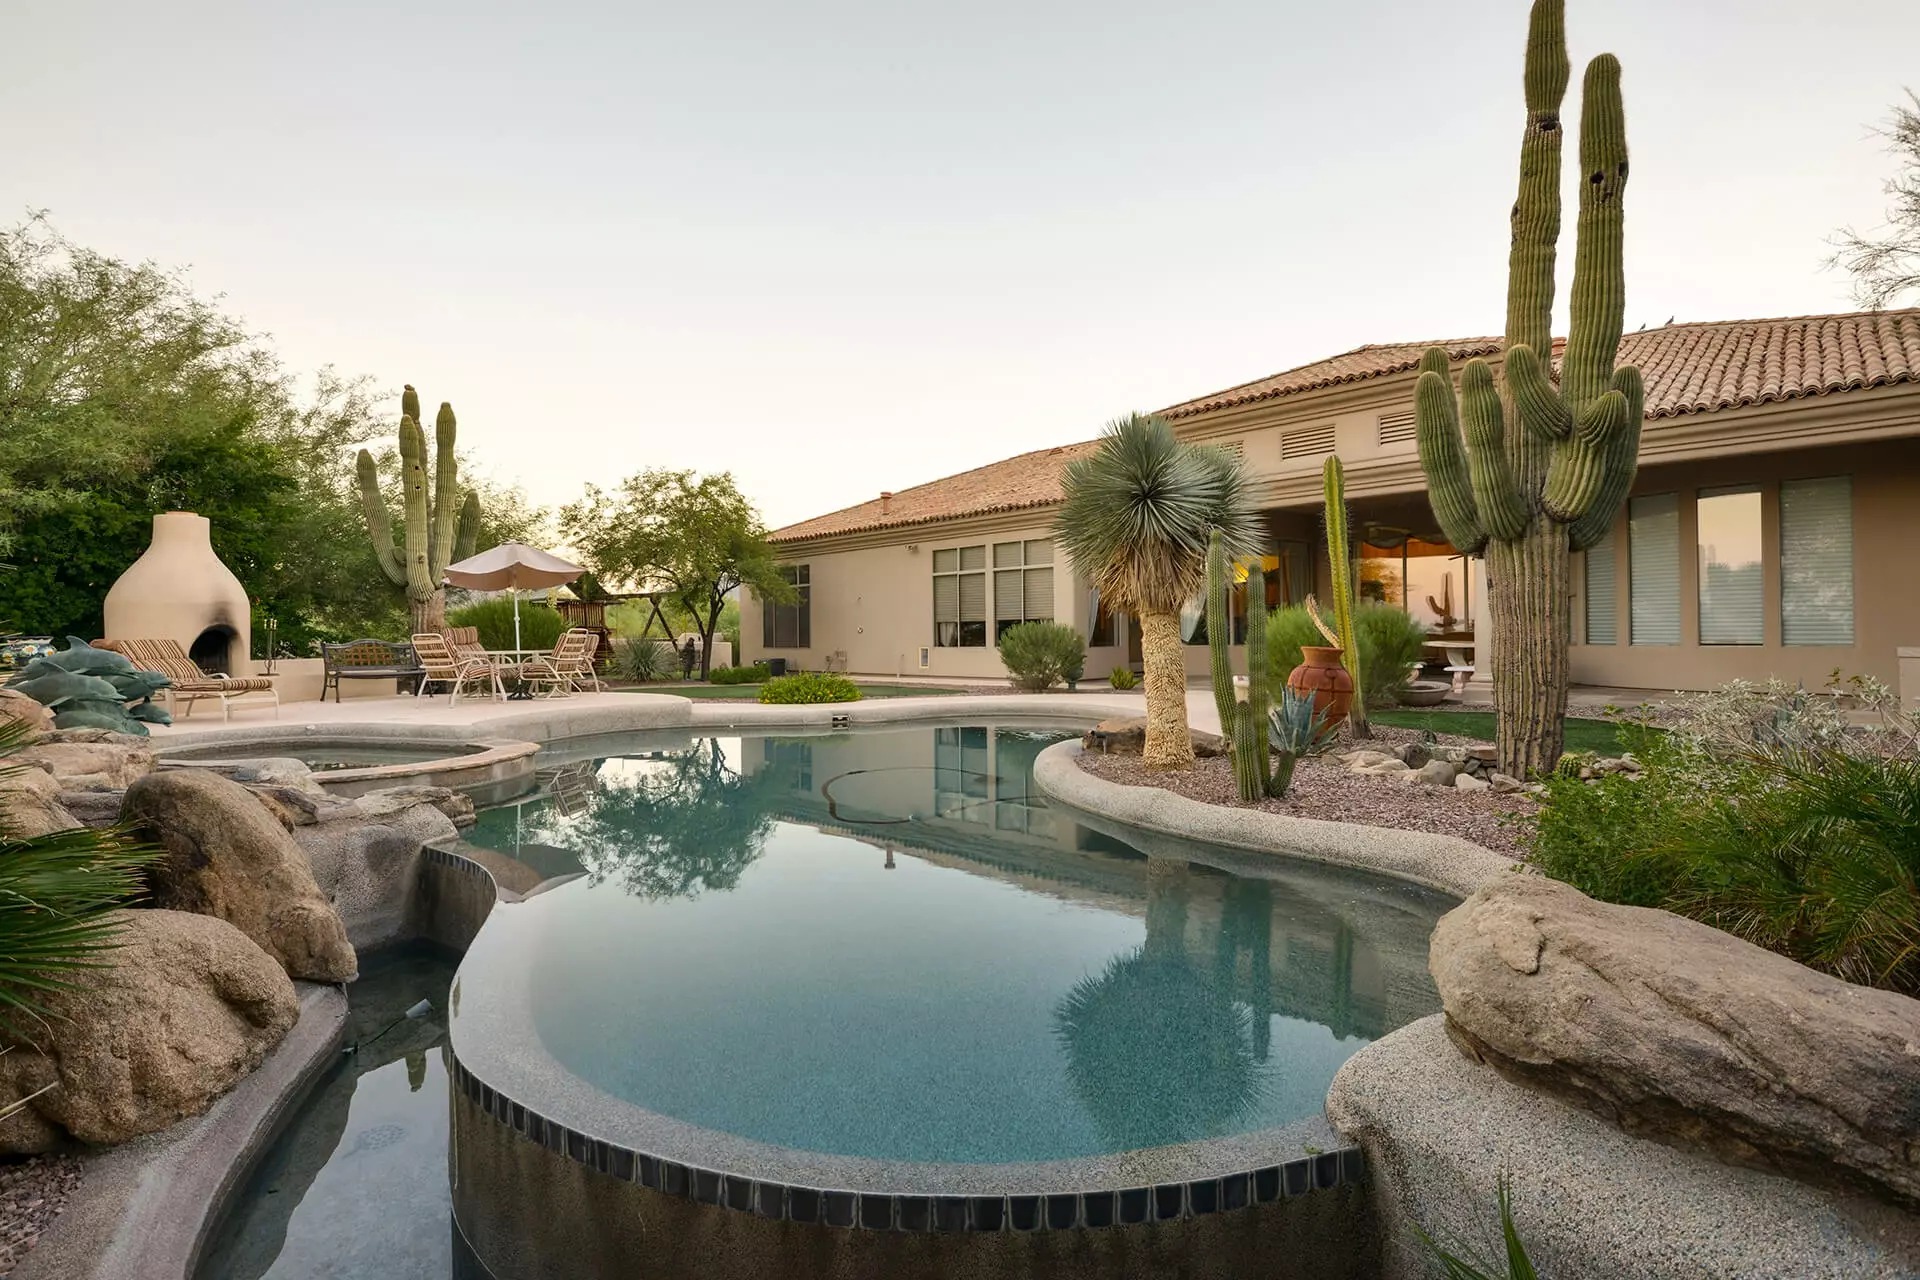 Vacation home for sale in Arizona